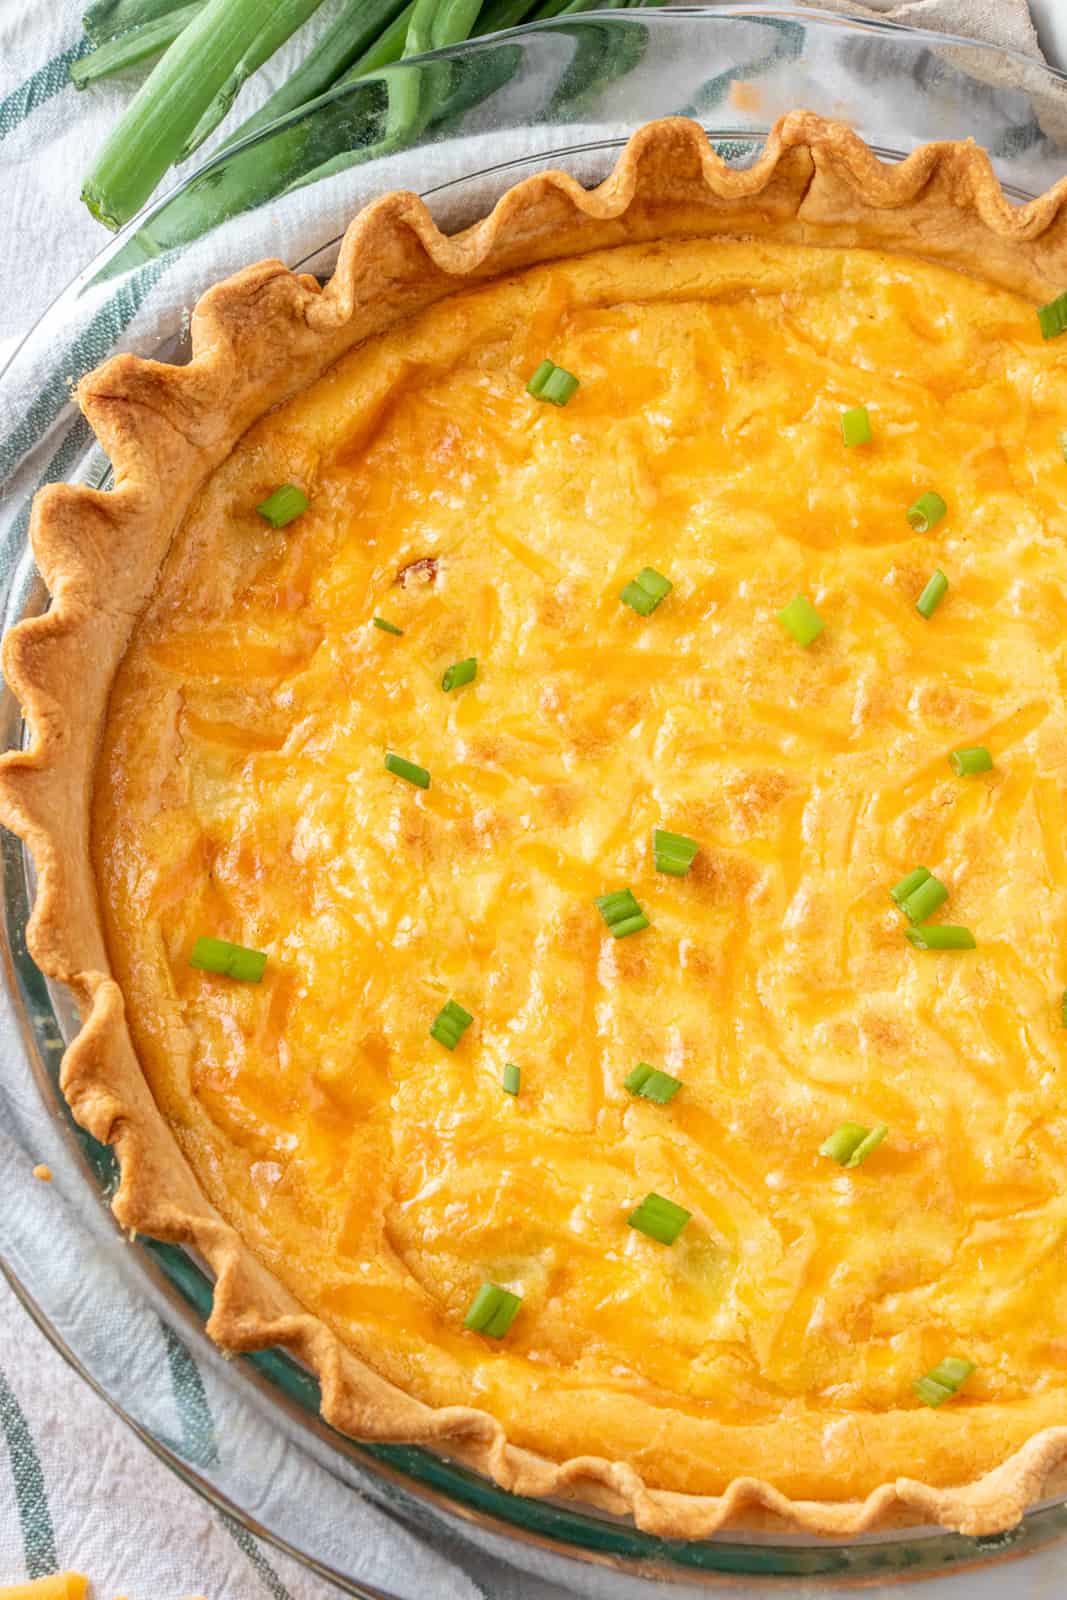 Overhead photo of quiche in pie dish with baked cheese and green onions